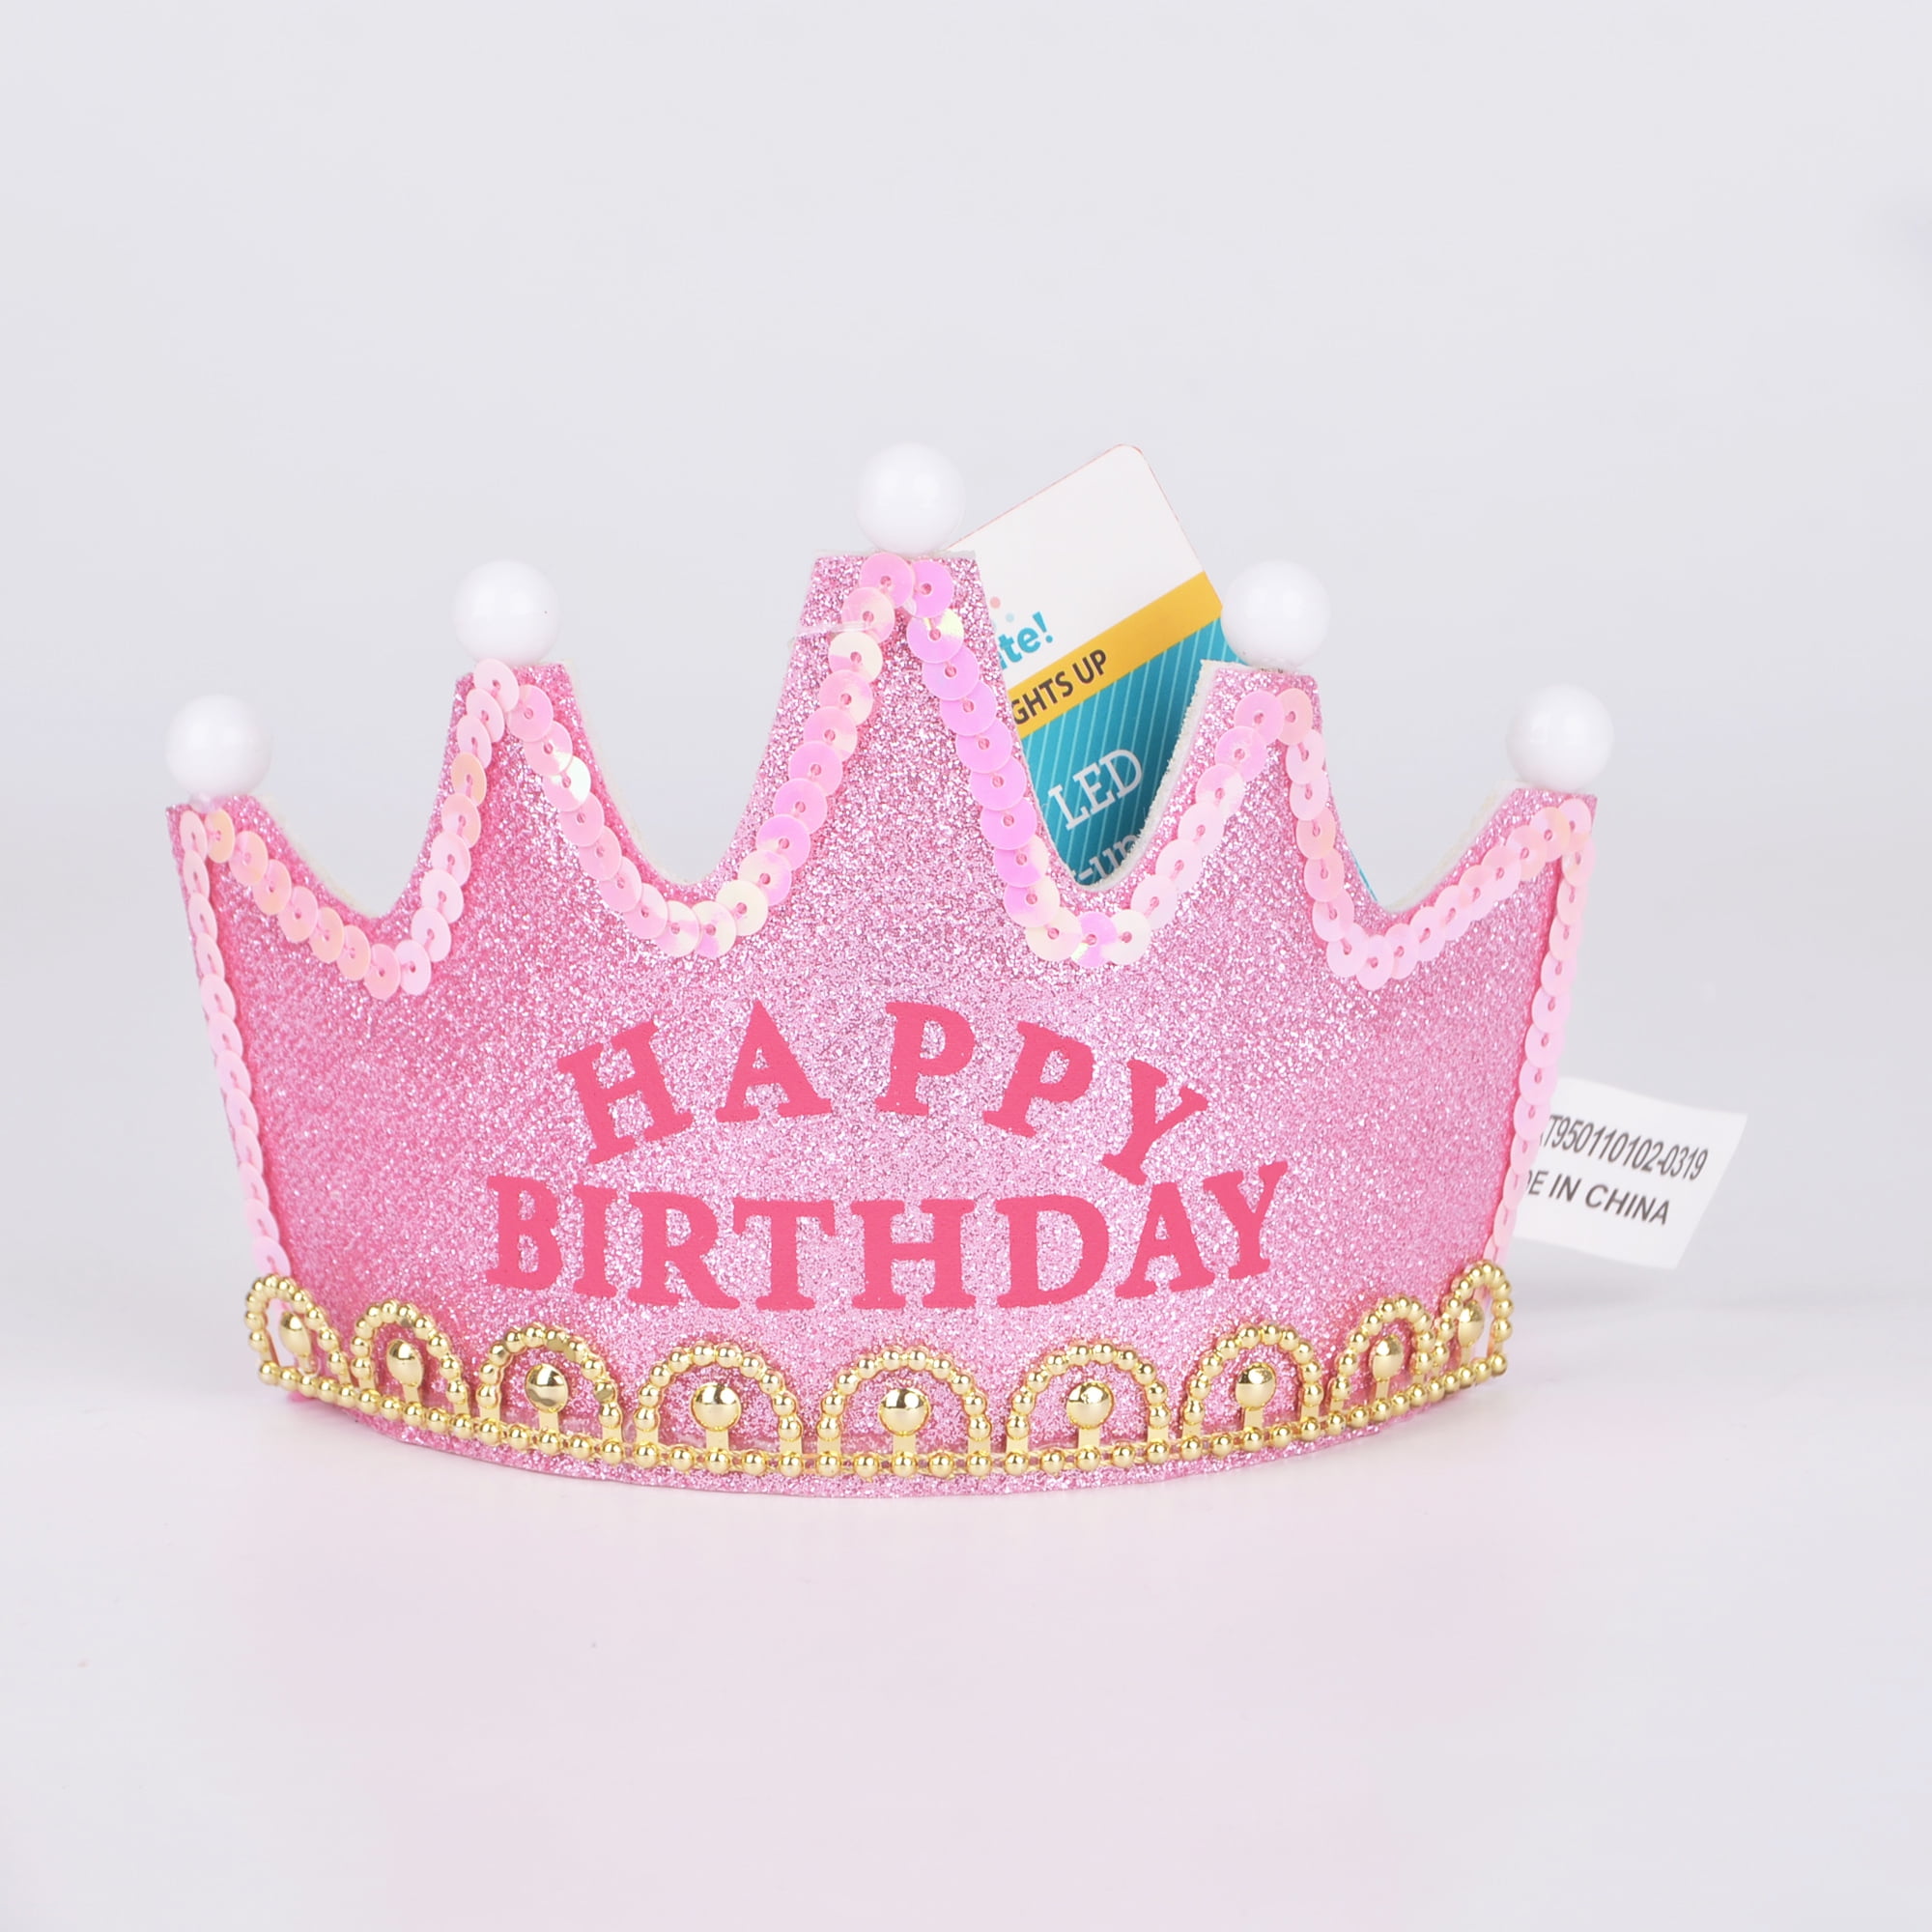 LED Light Up Princess King Happy Birthday Crown,Tiara Costume Accessory for Kids and Adults